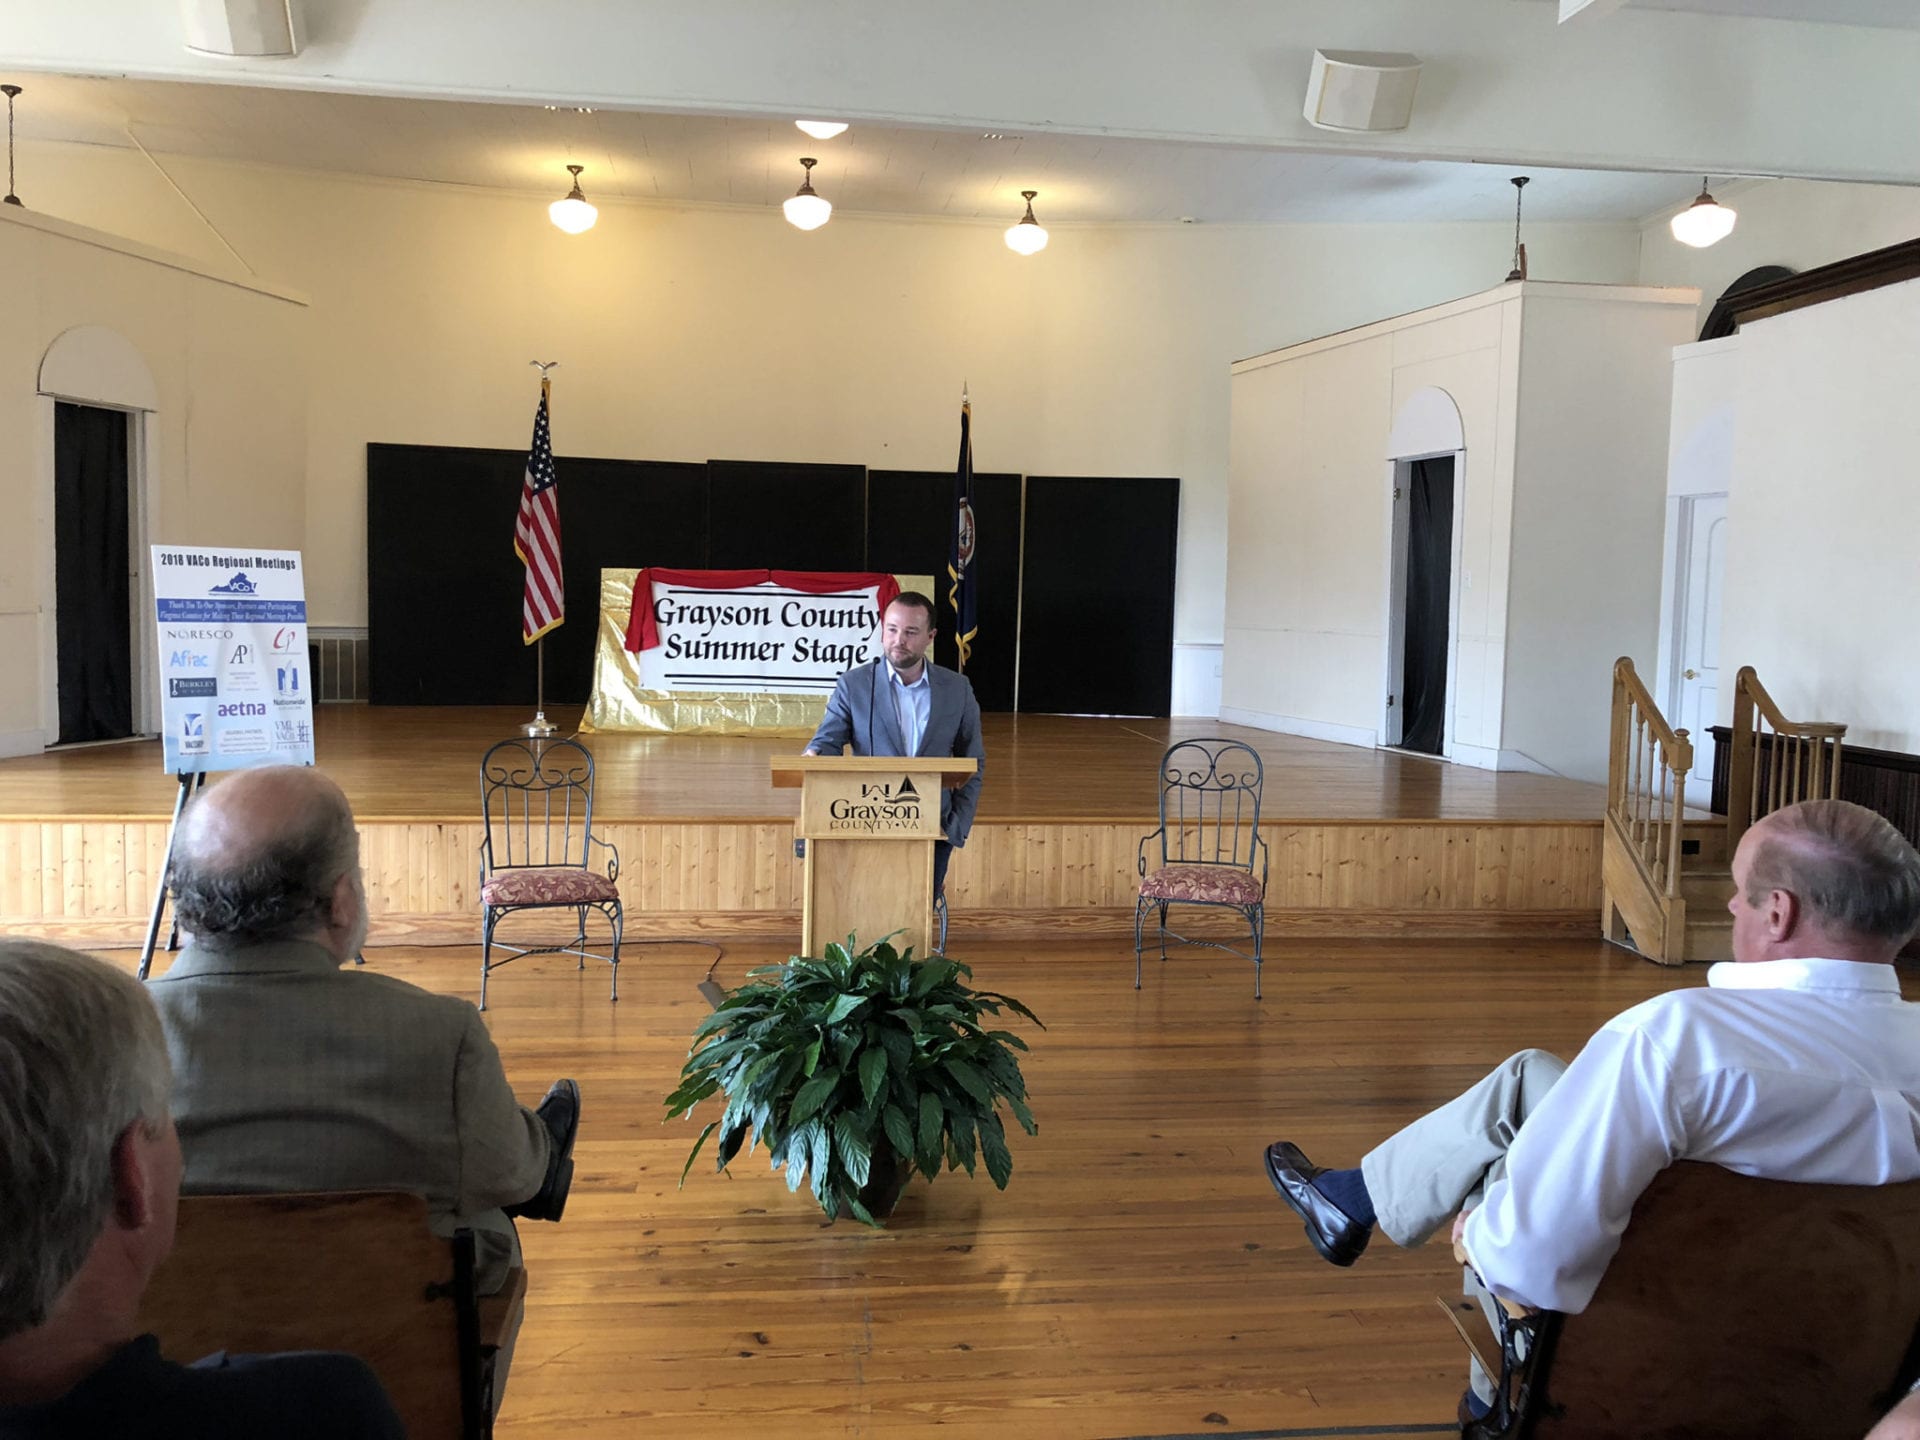 Regionalism, Rural Broadband, and Restoring State Funding Support are